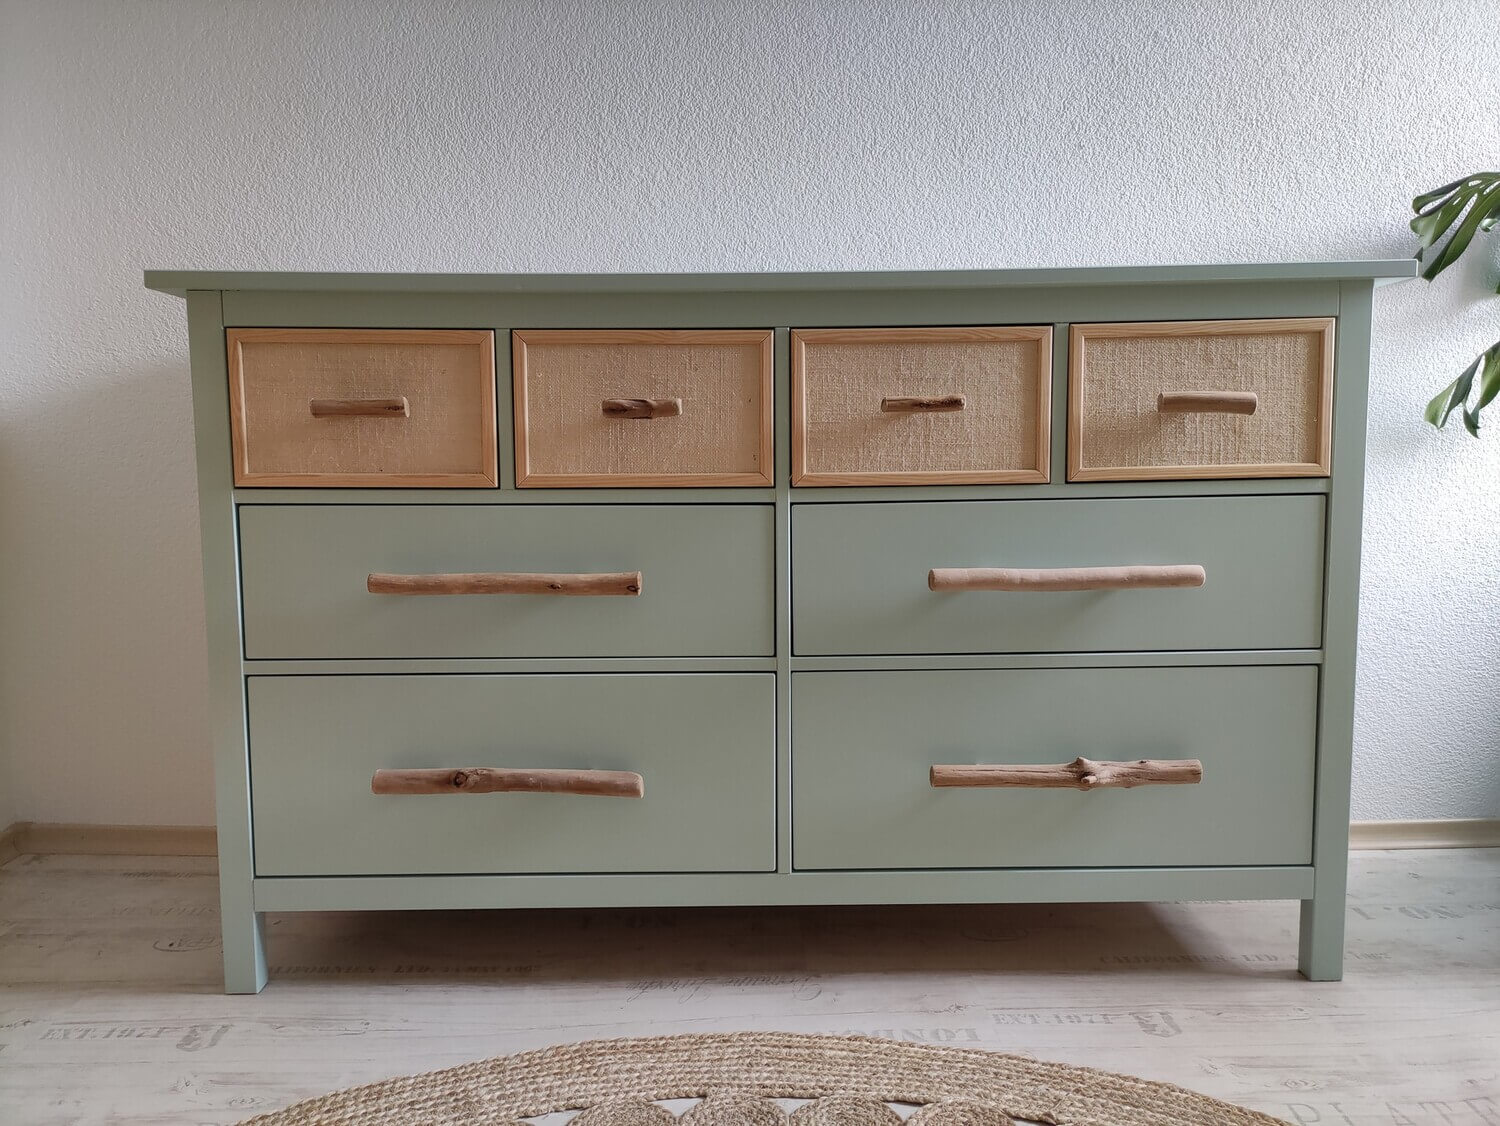 Paint Touch Up for Your Ikea Furniture: A New Product Review